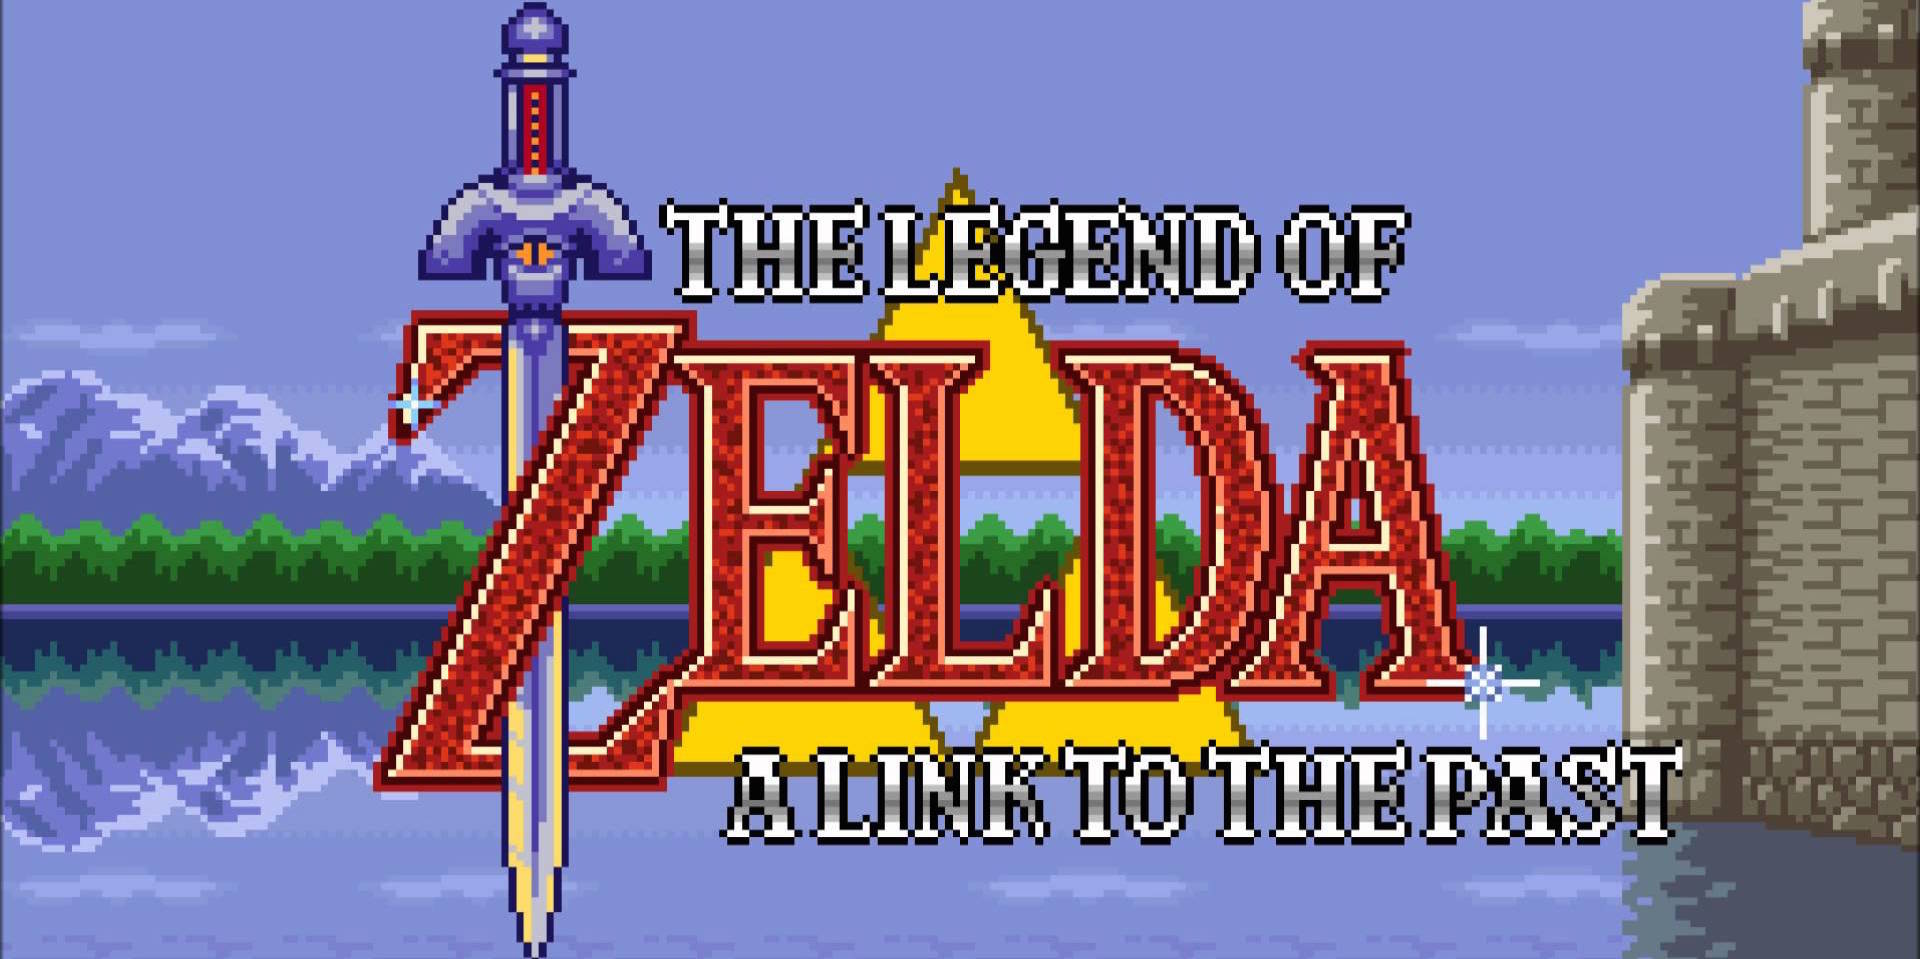 best snes games on 3ds